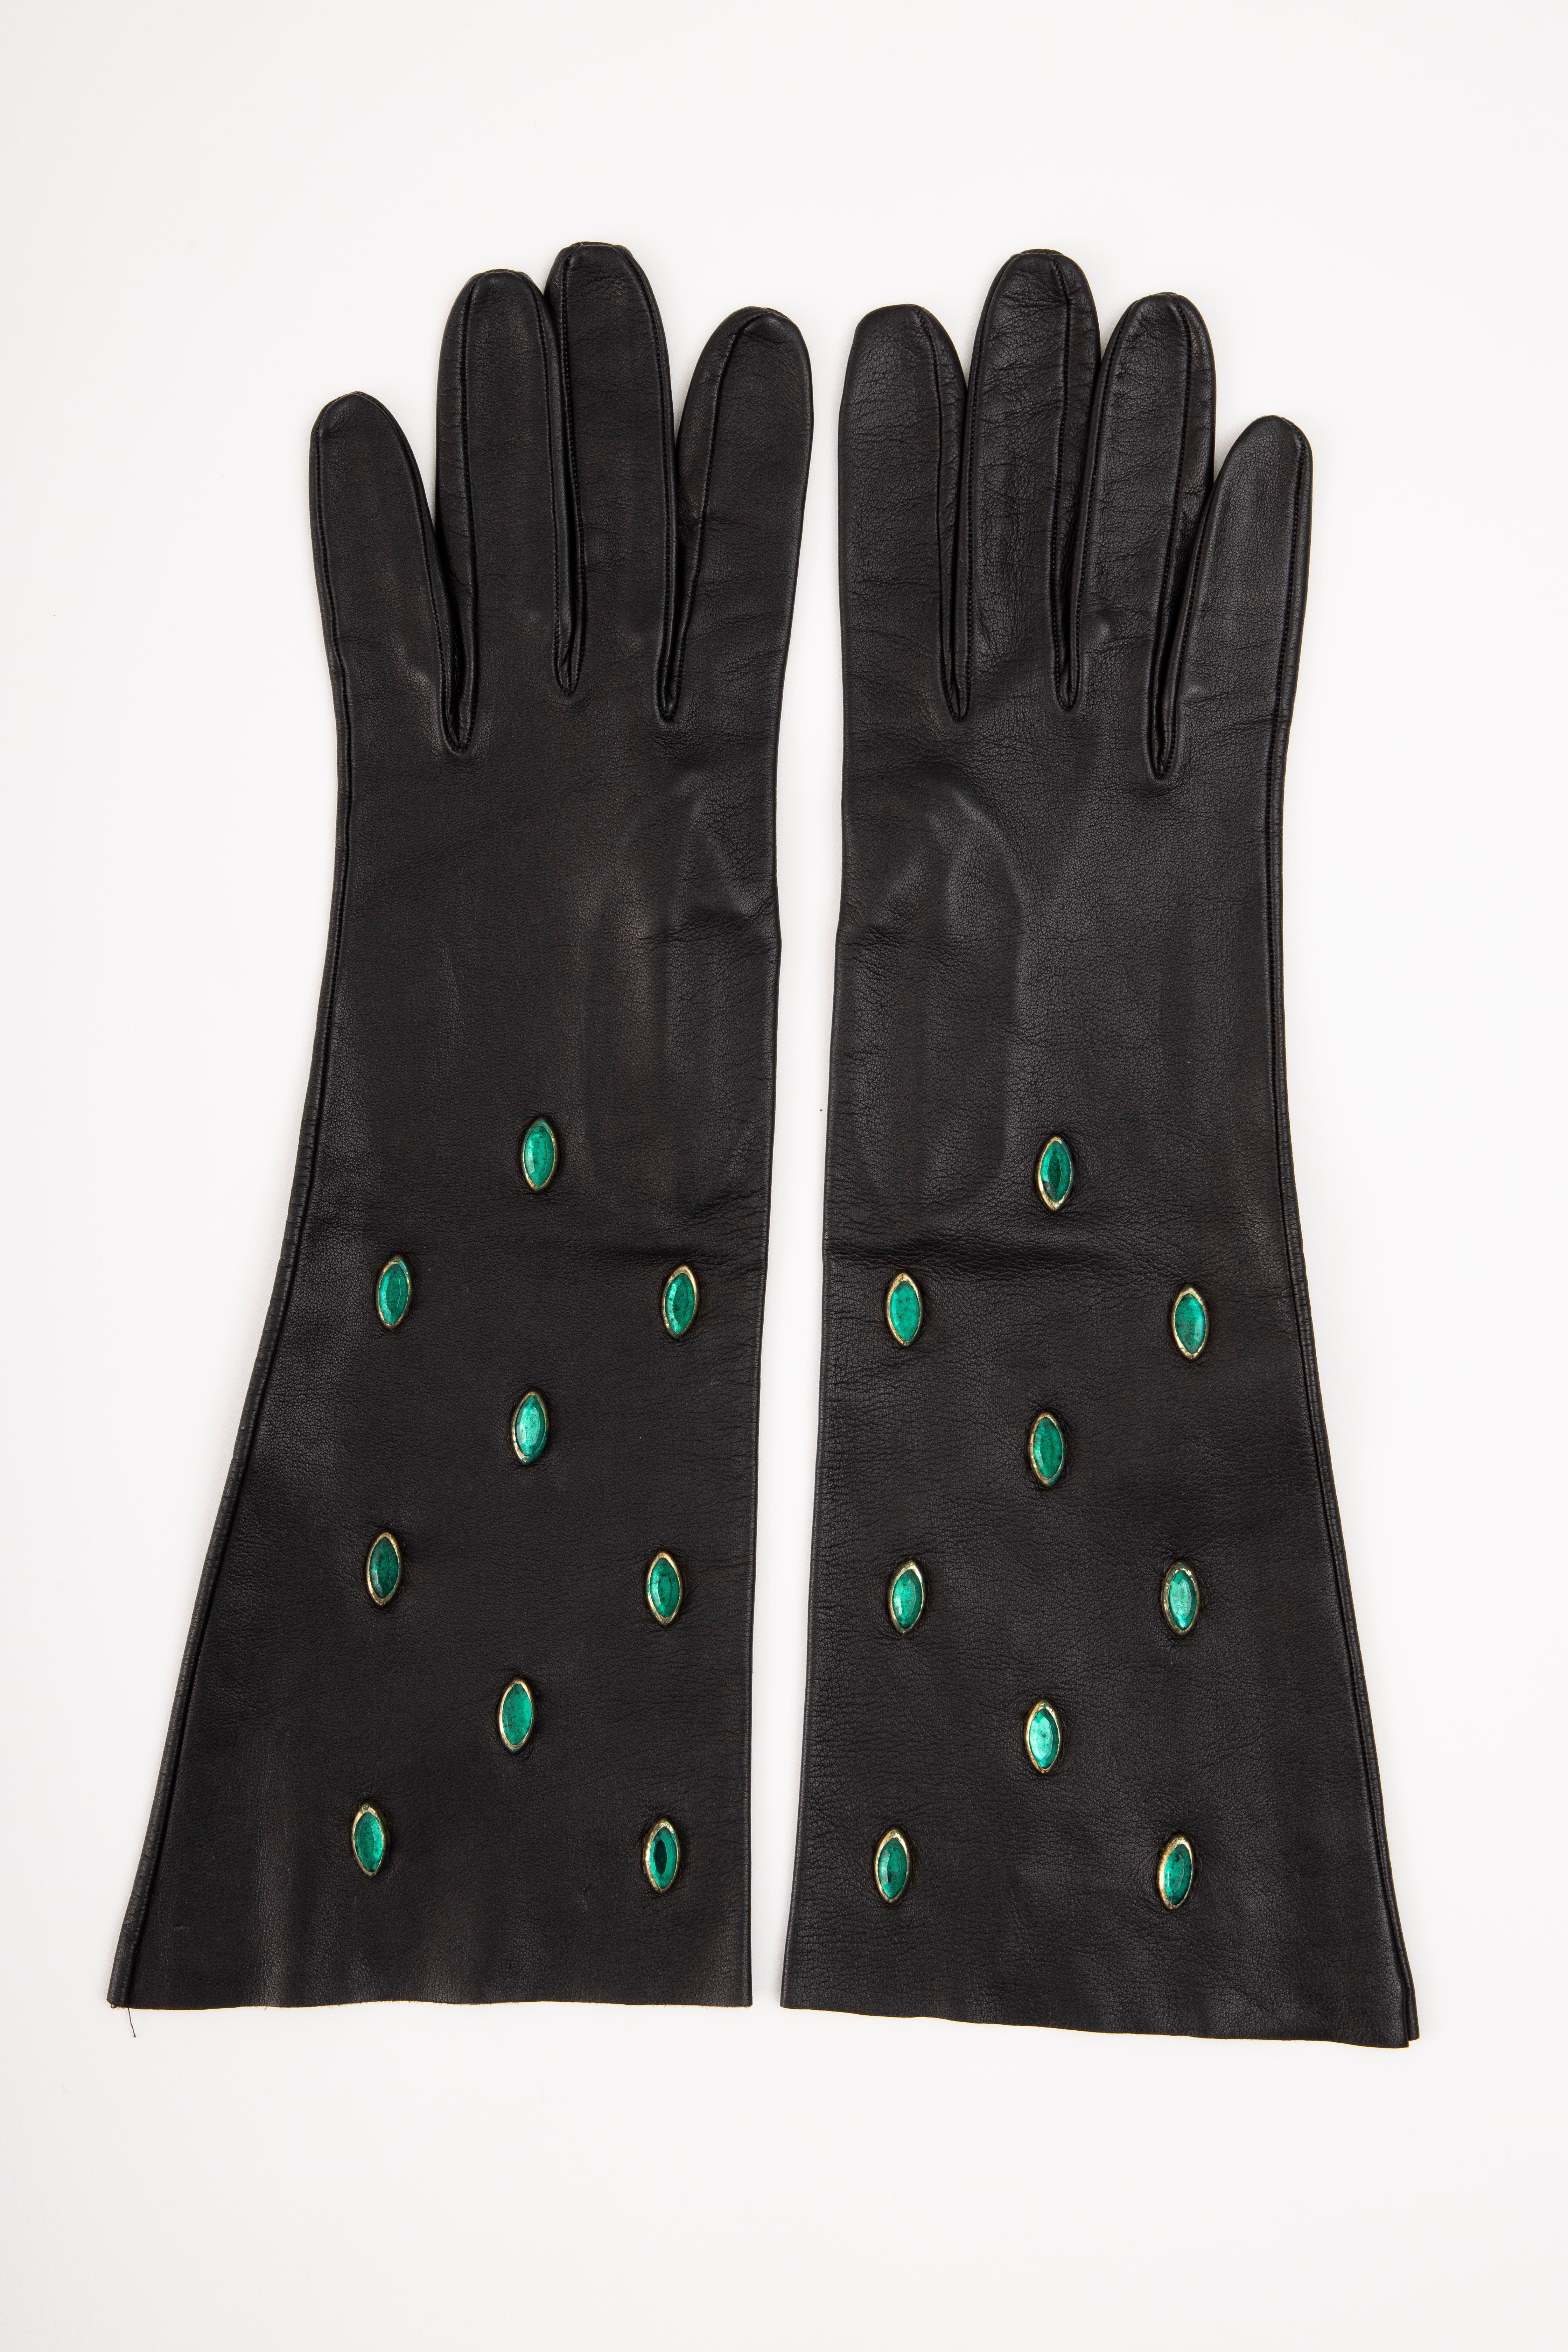 Yves Saint Laurent Black Leather & Appliquéd Green Glass Gloves, Circa: 1980's In Good Condition For Sale In Cincinnati, OH